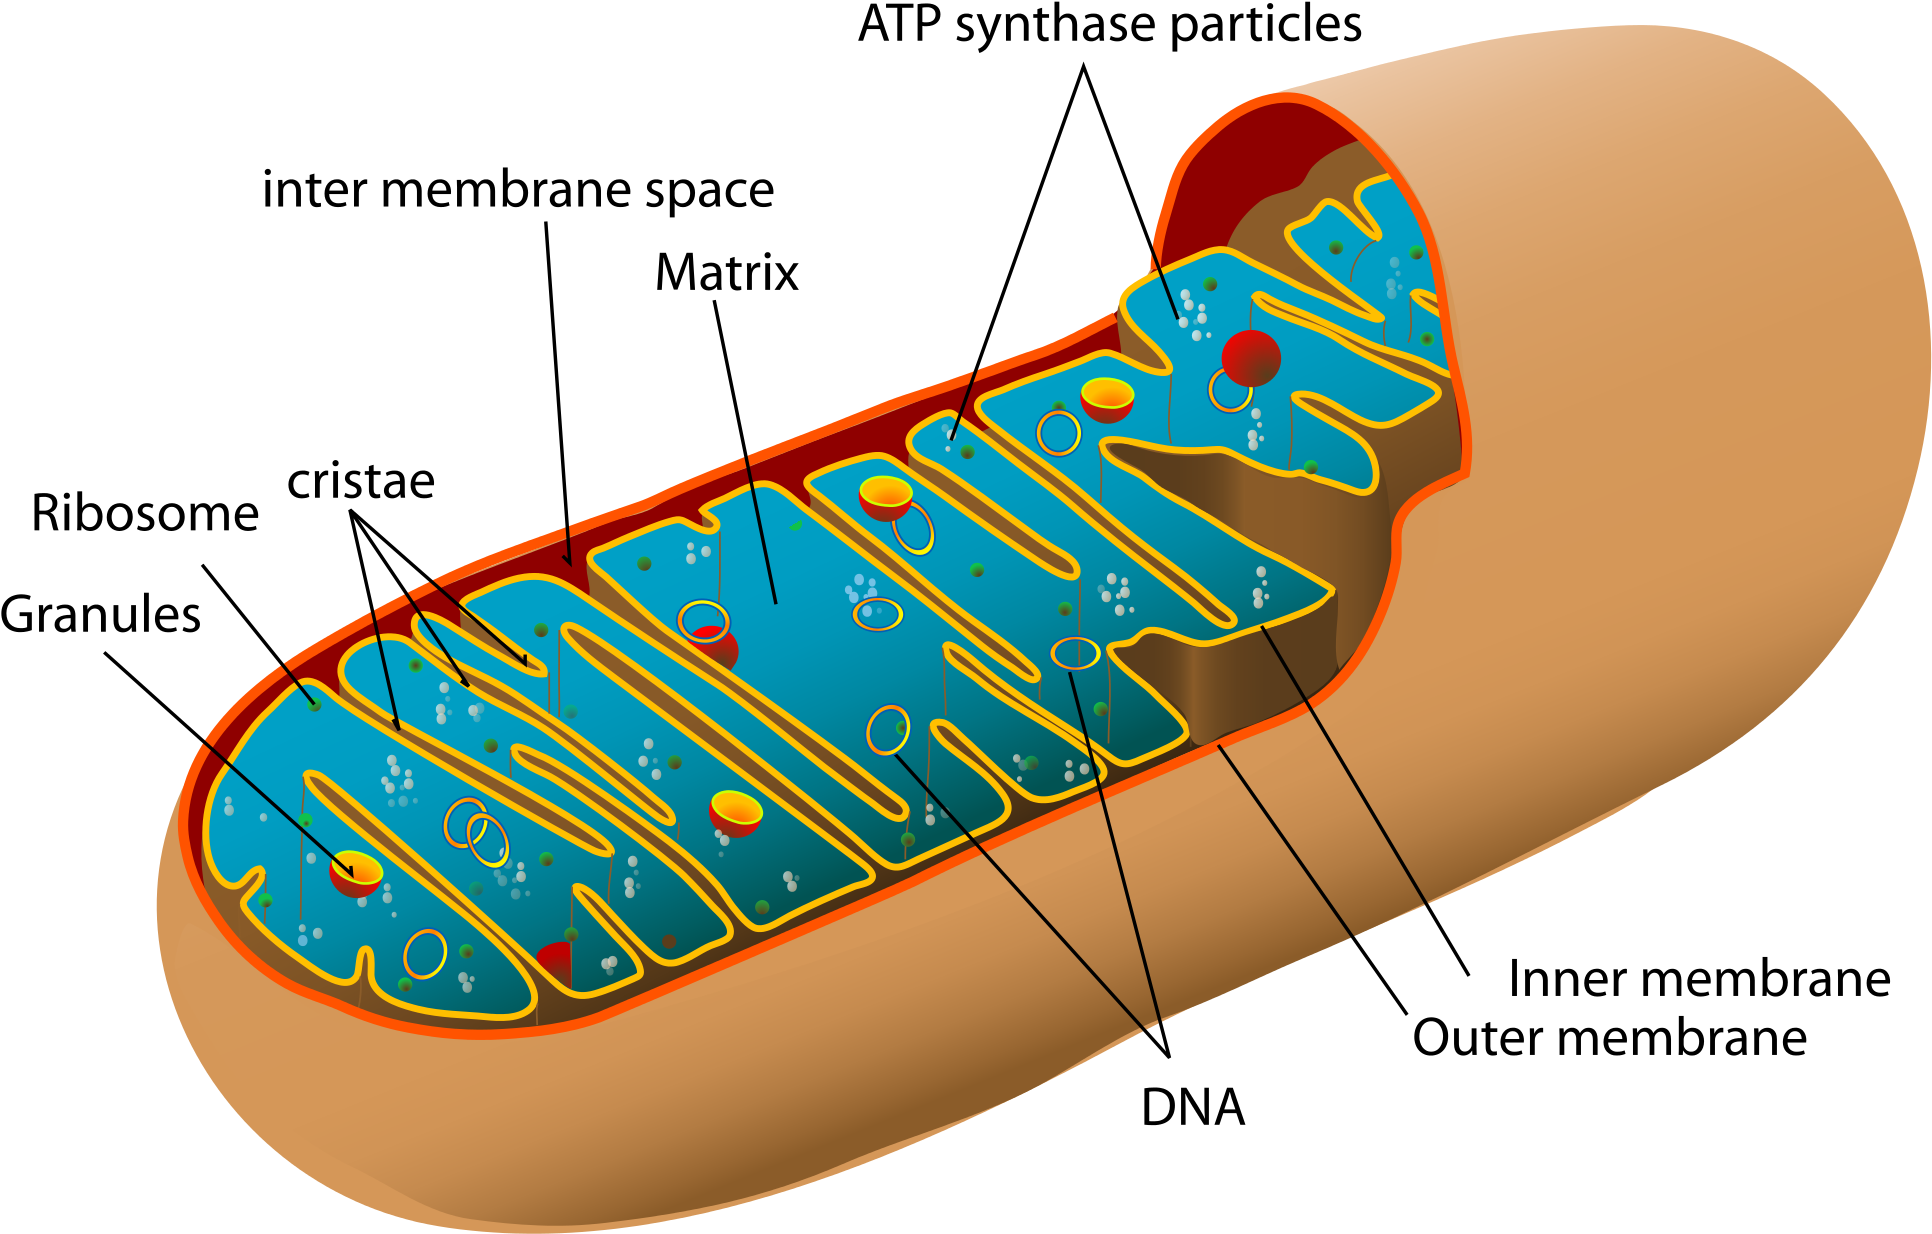 Created With Raphaël - Mitochondria Structure (2000x1371)